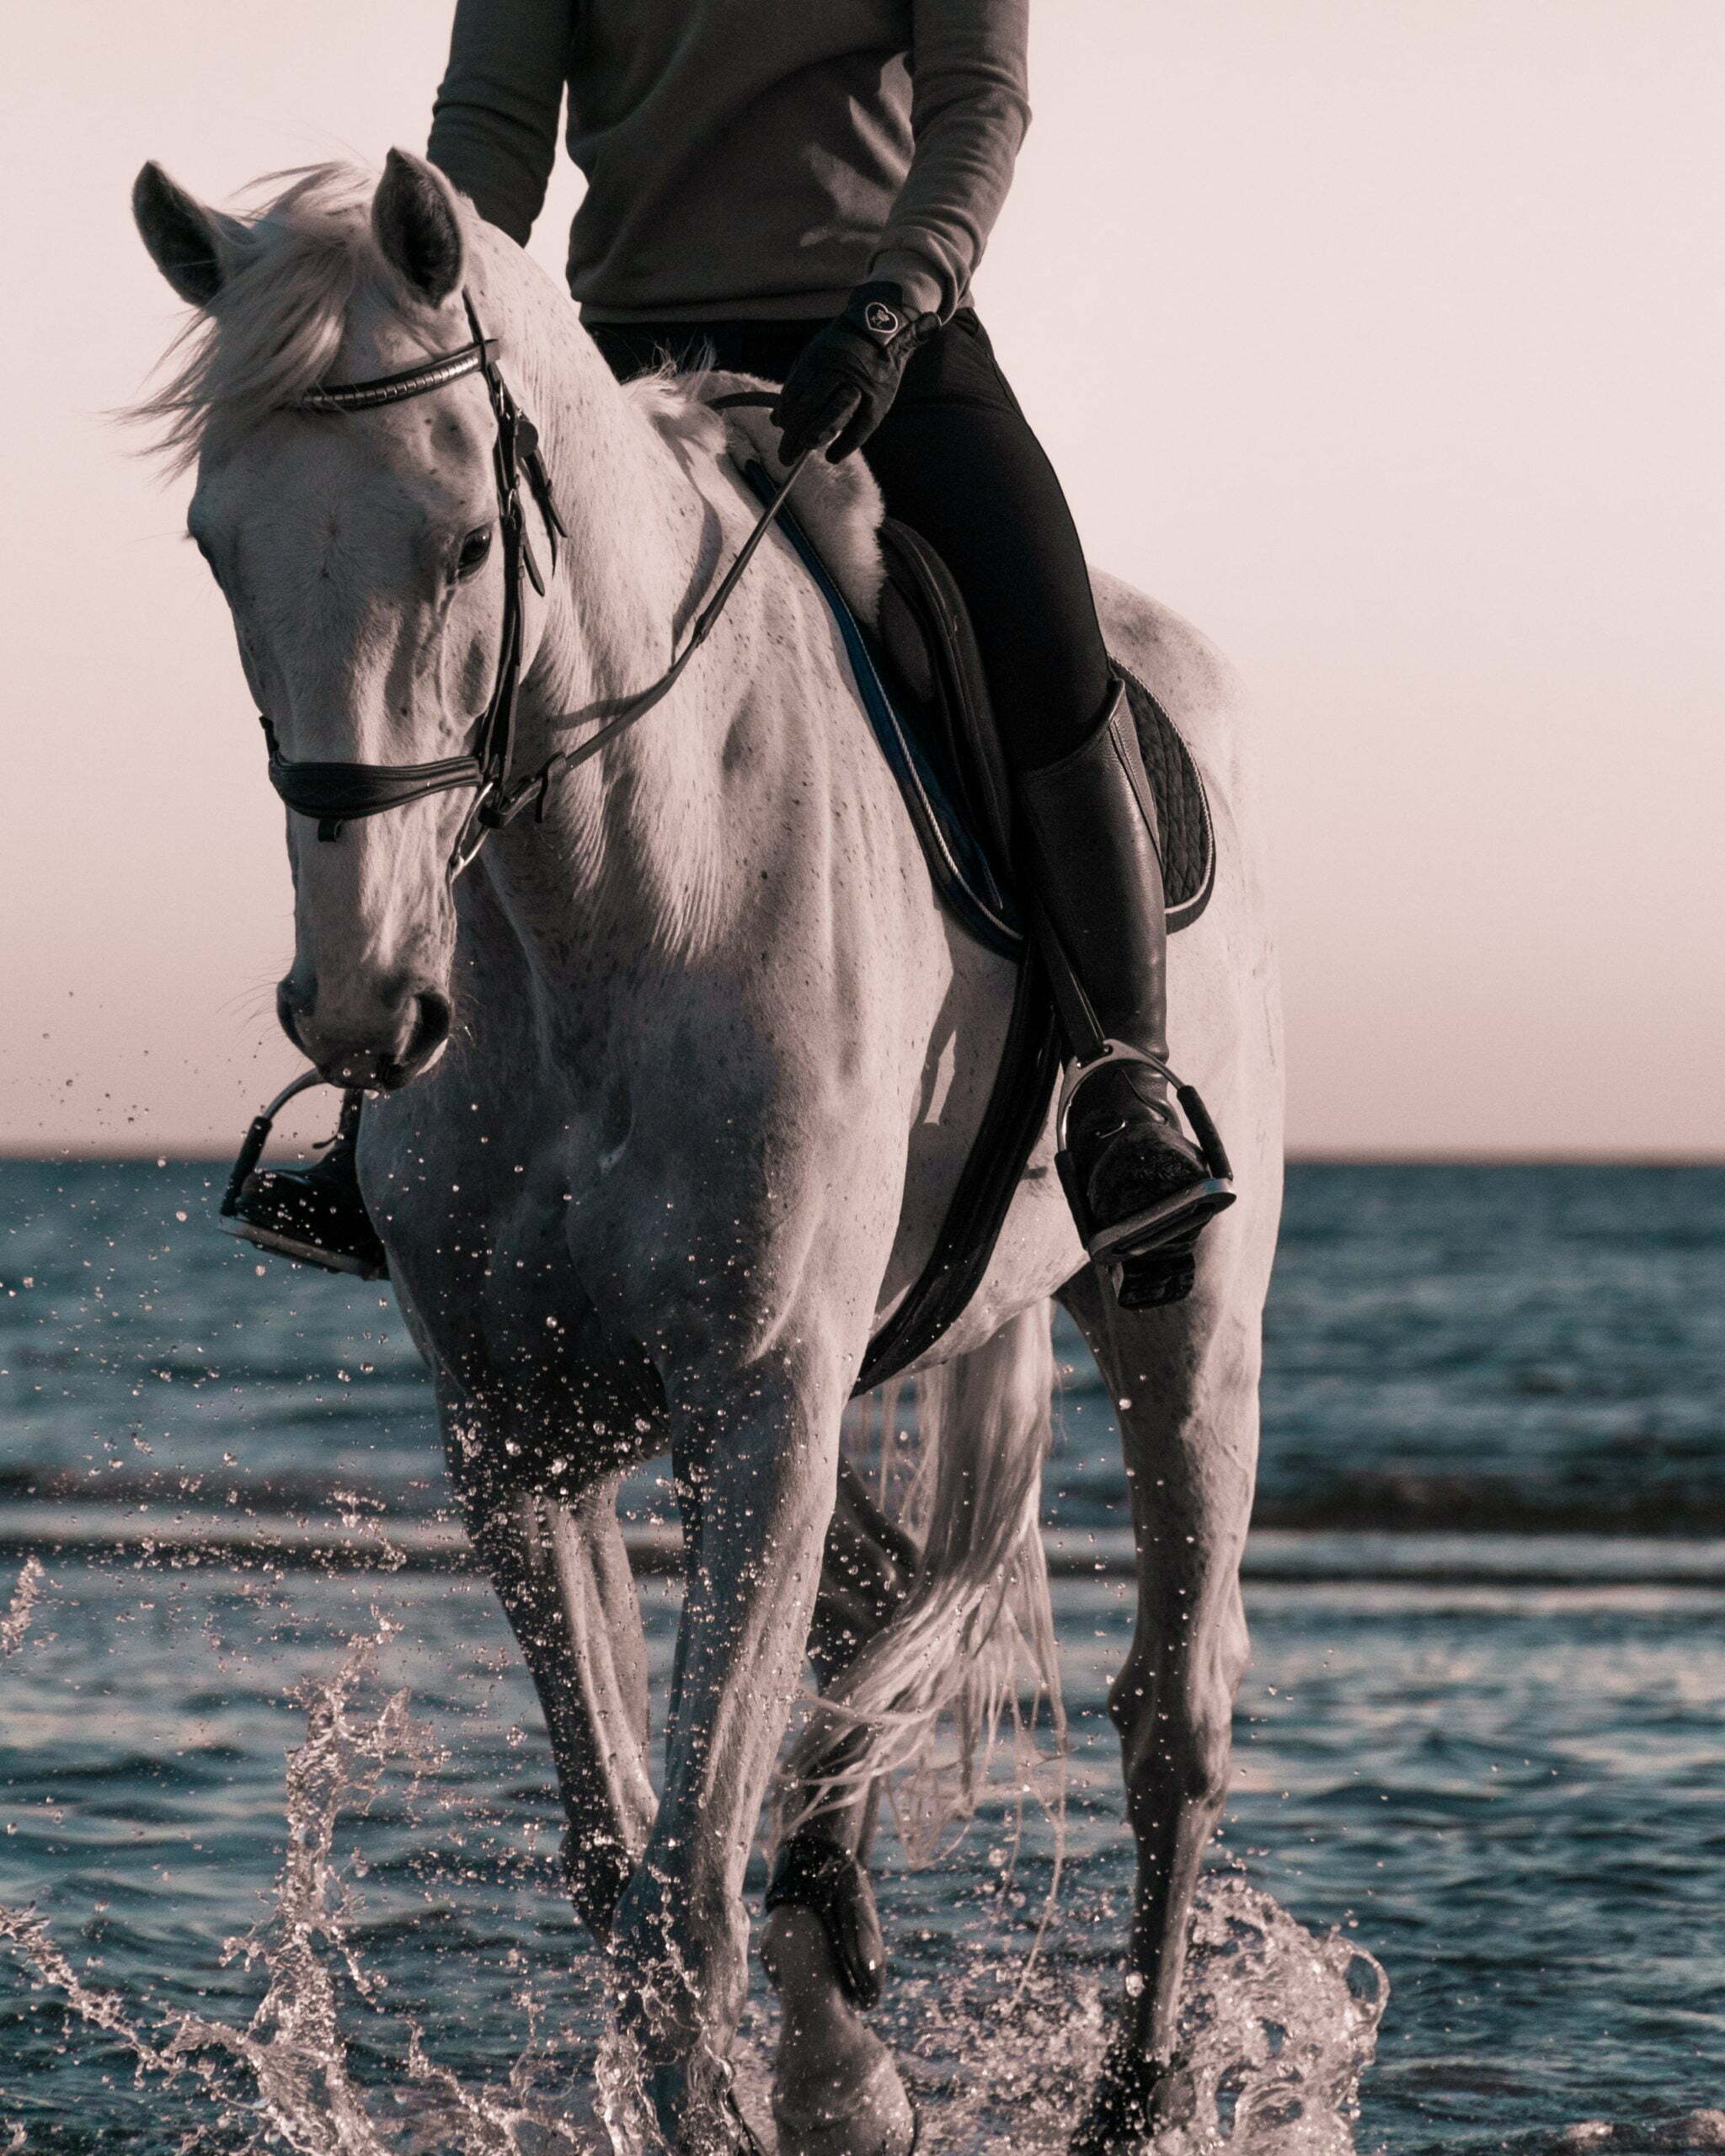 person riding on white horse on beach during daytime